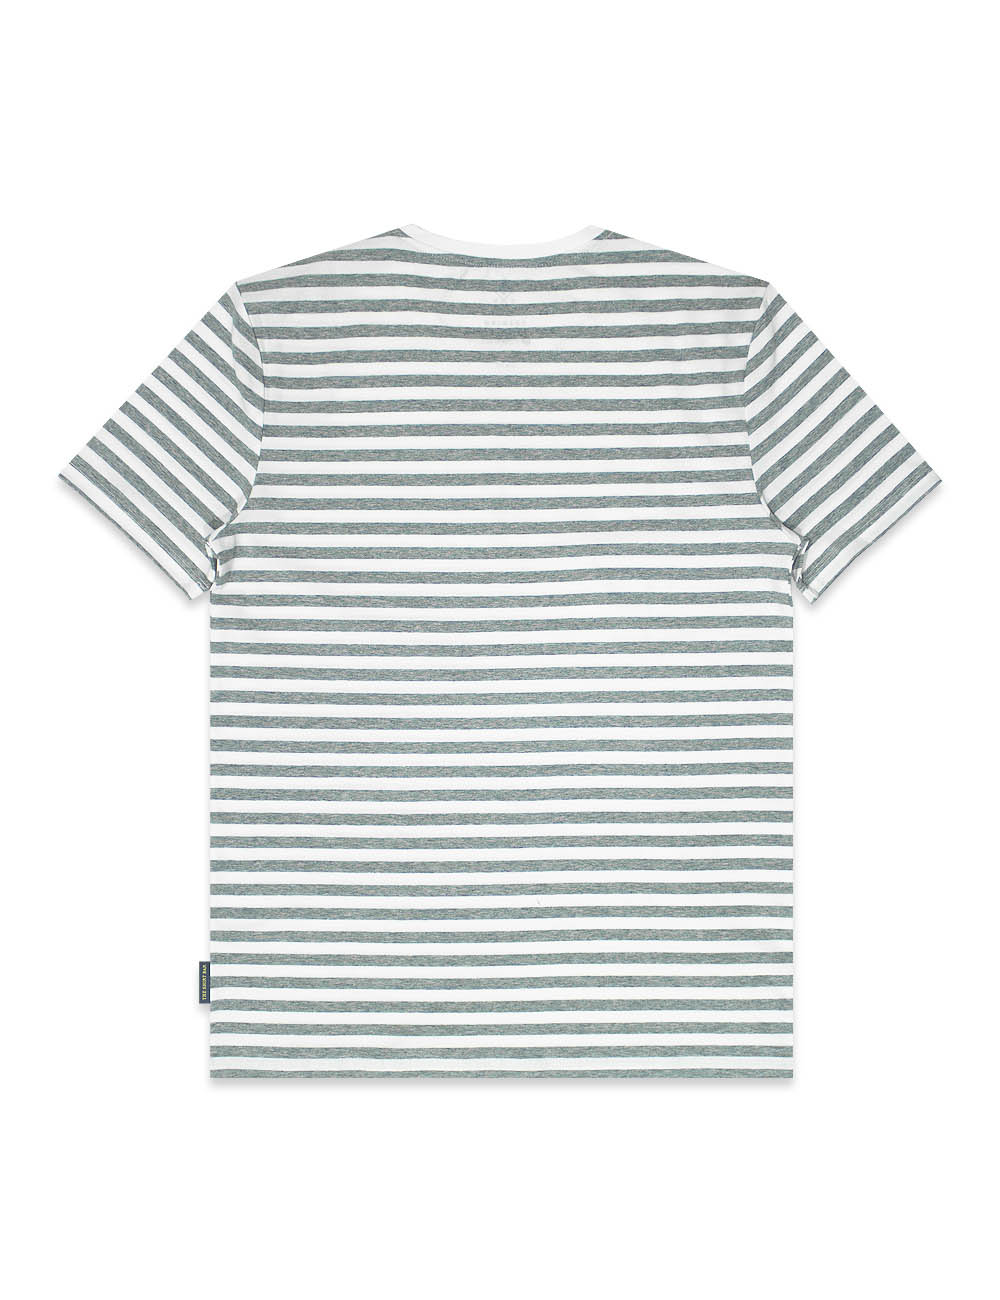 White And Grey Stripe Crew Neck Short Sleeve T-shirt - TS1A2.5